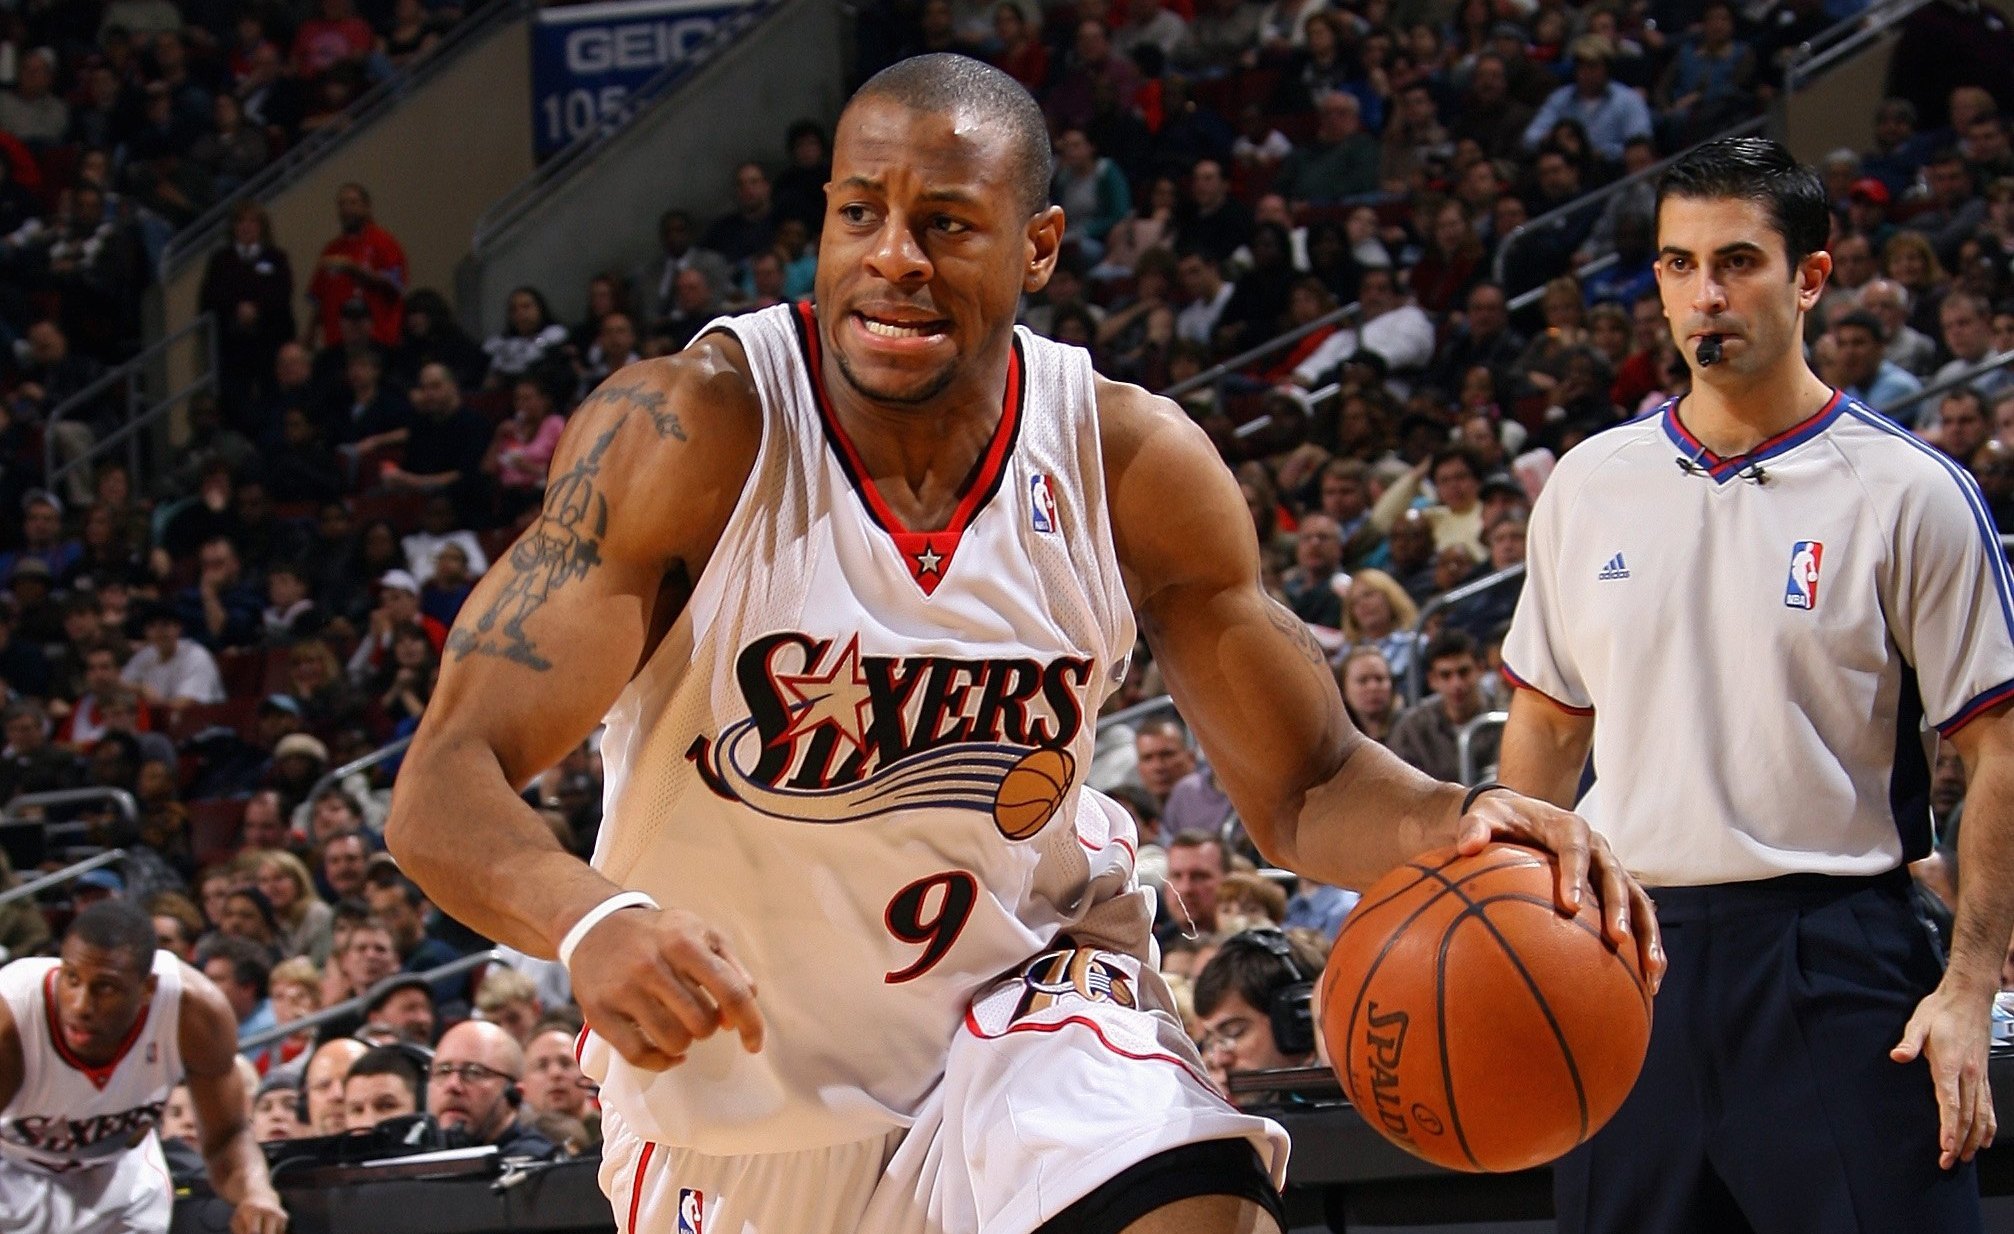 NBA draft rewind: Sixers take Andre Iguodala with 9th pick in 2004